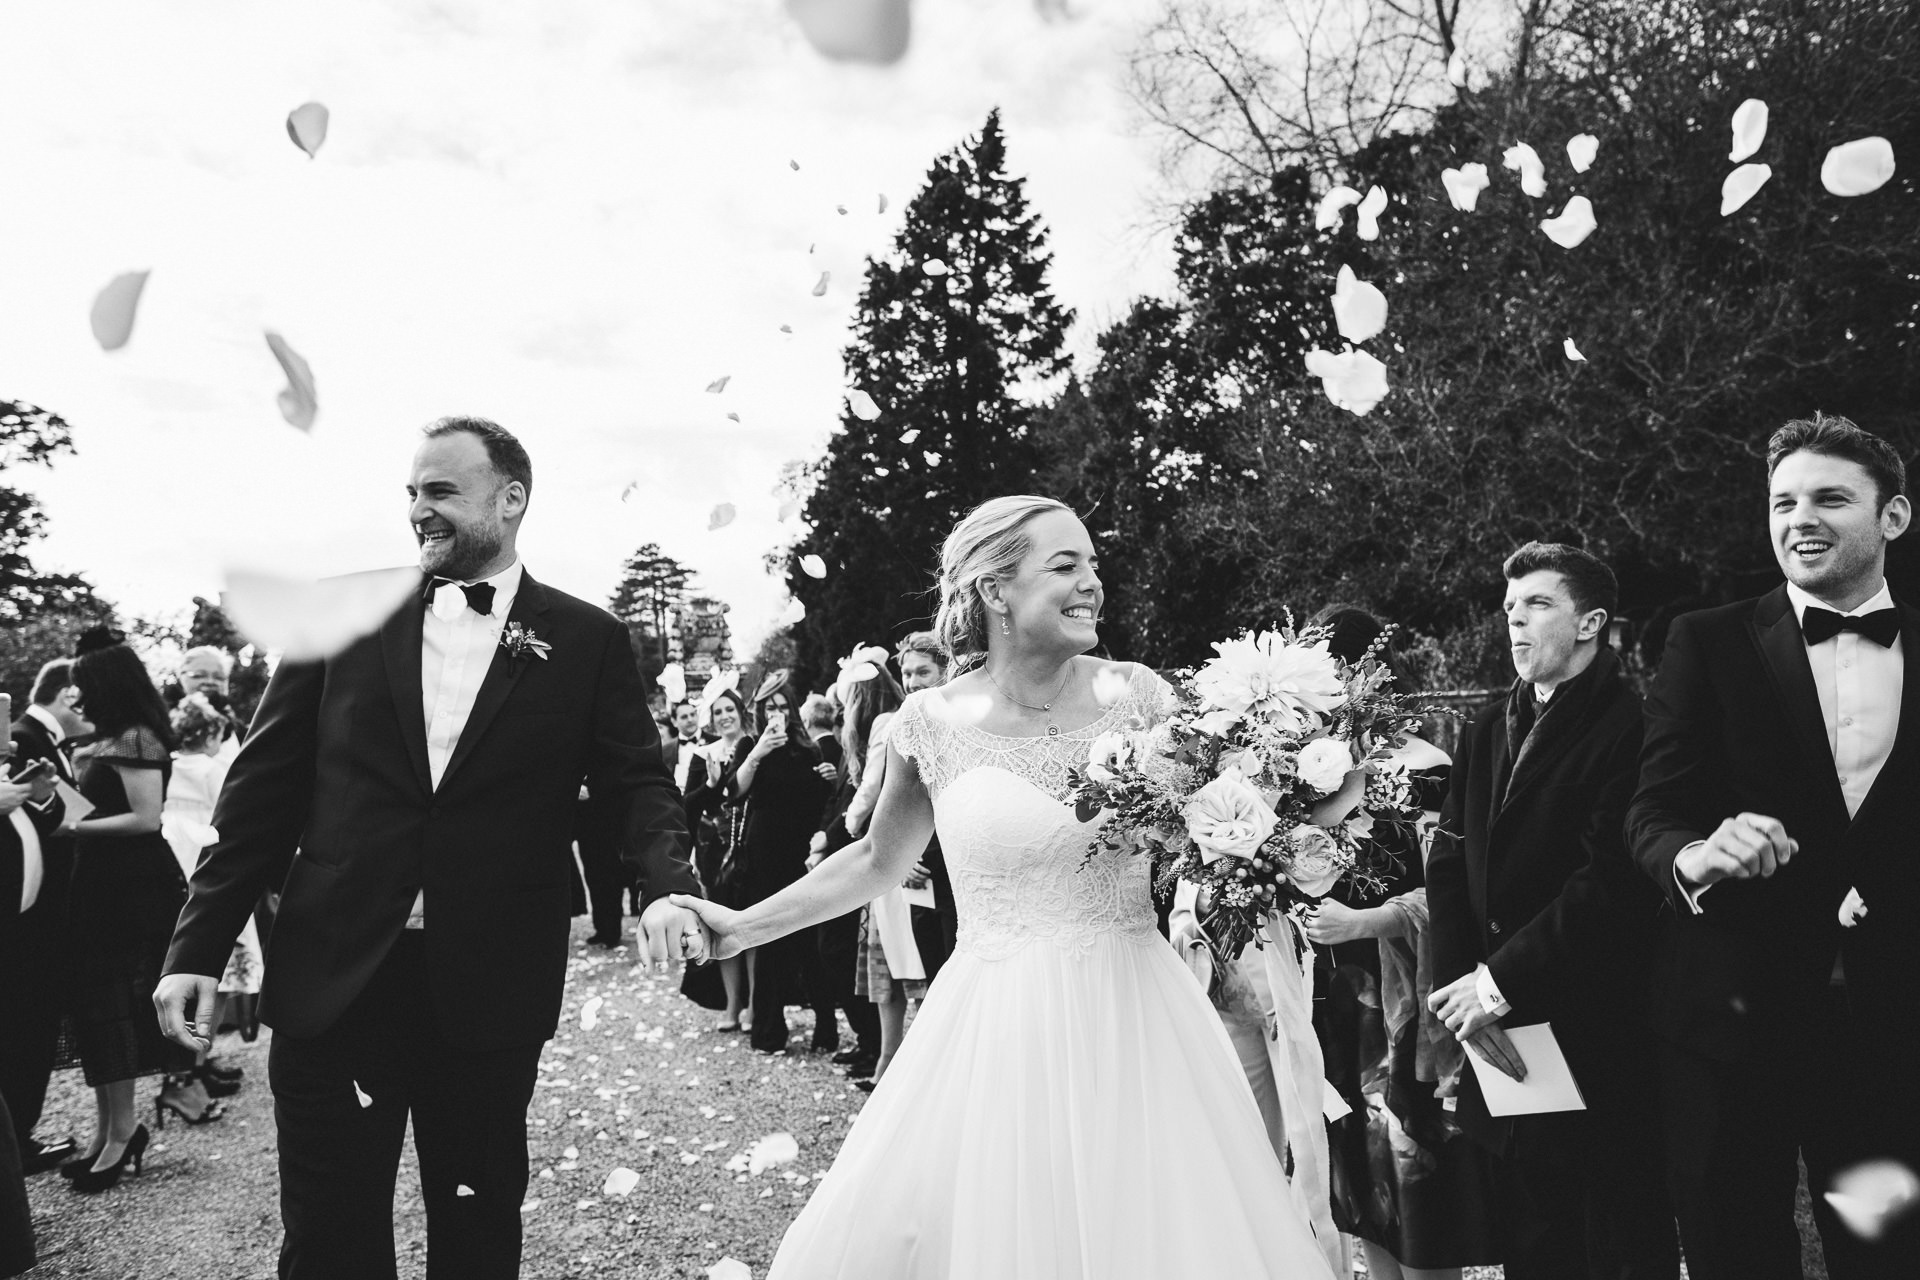 Bride and groom smiling and walking through confetti